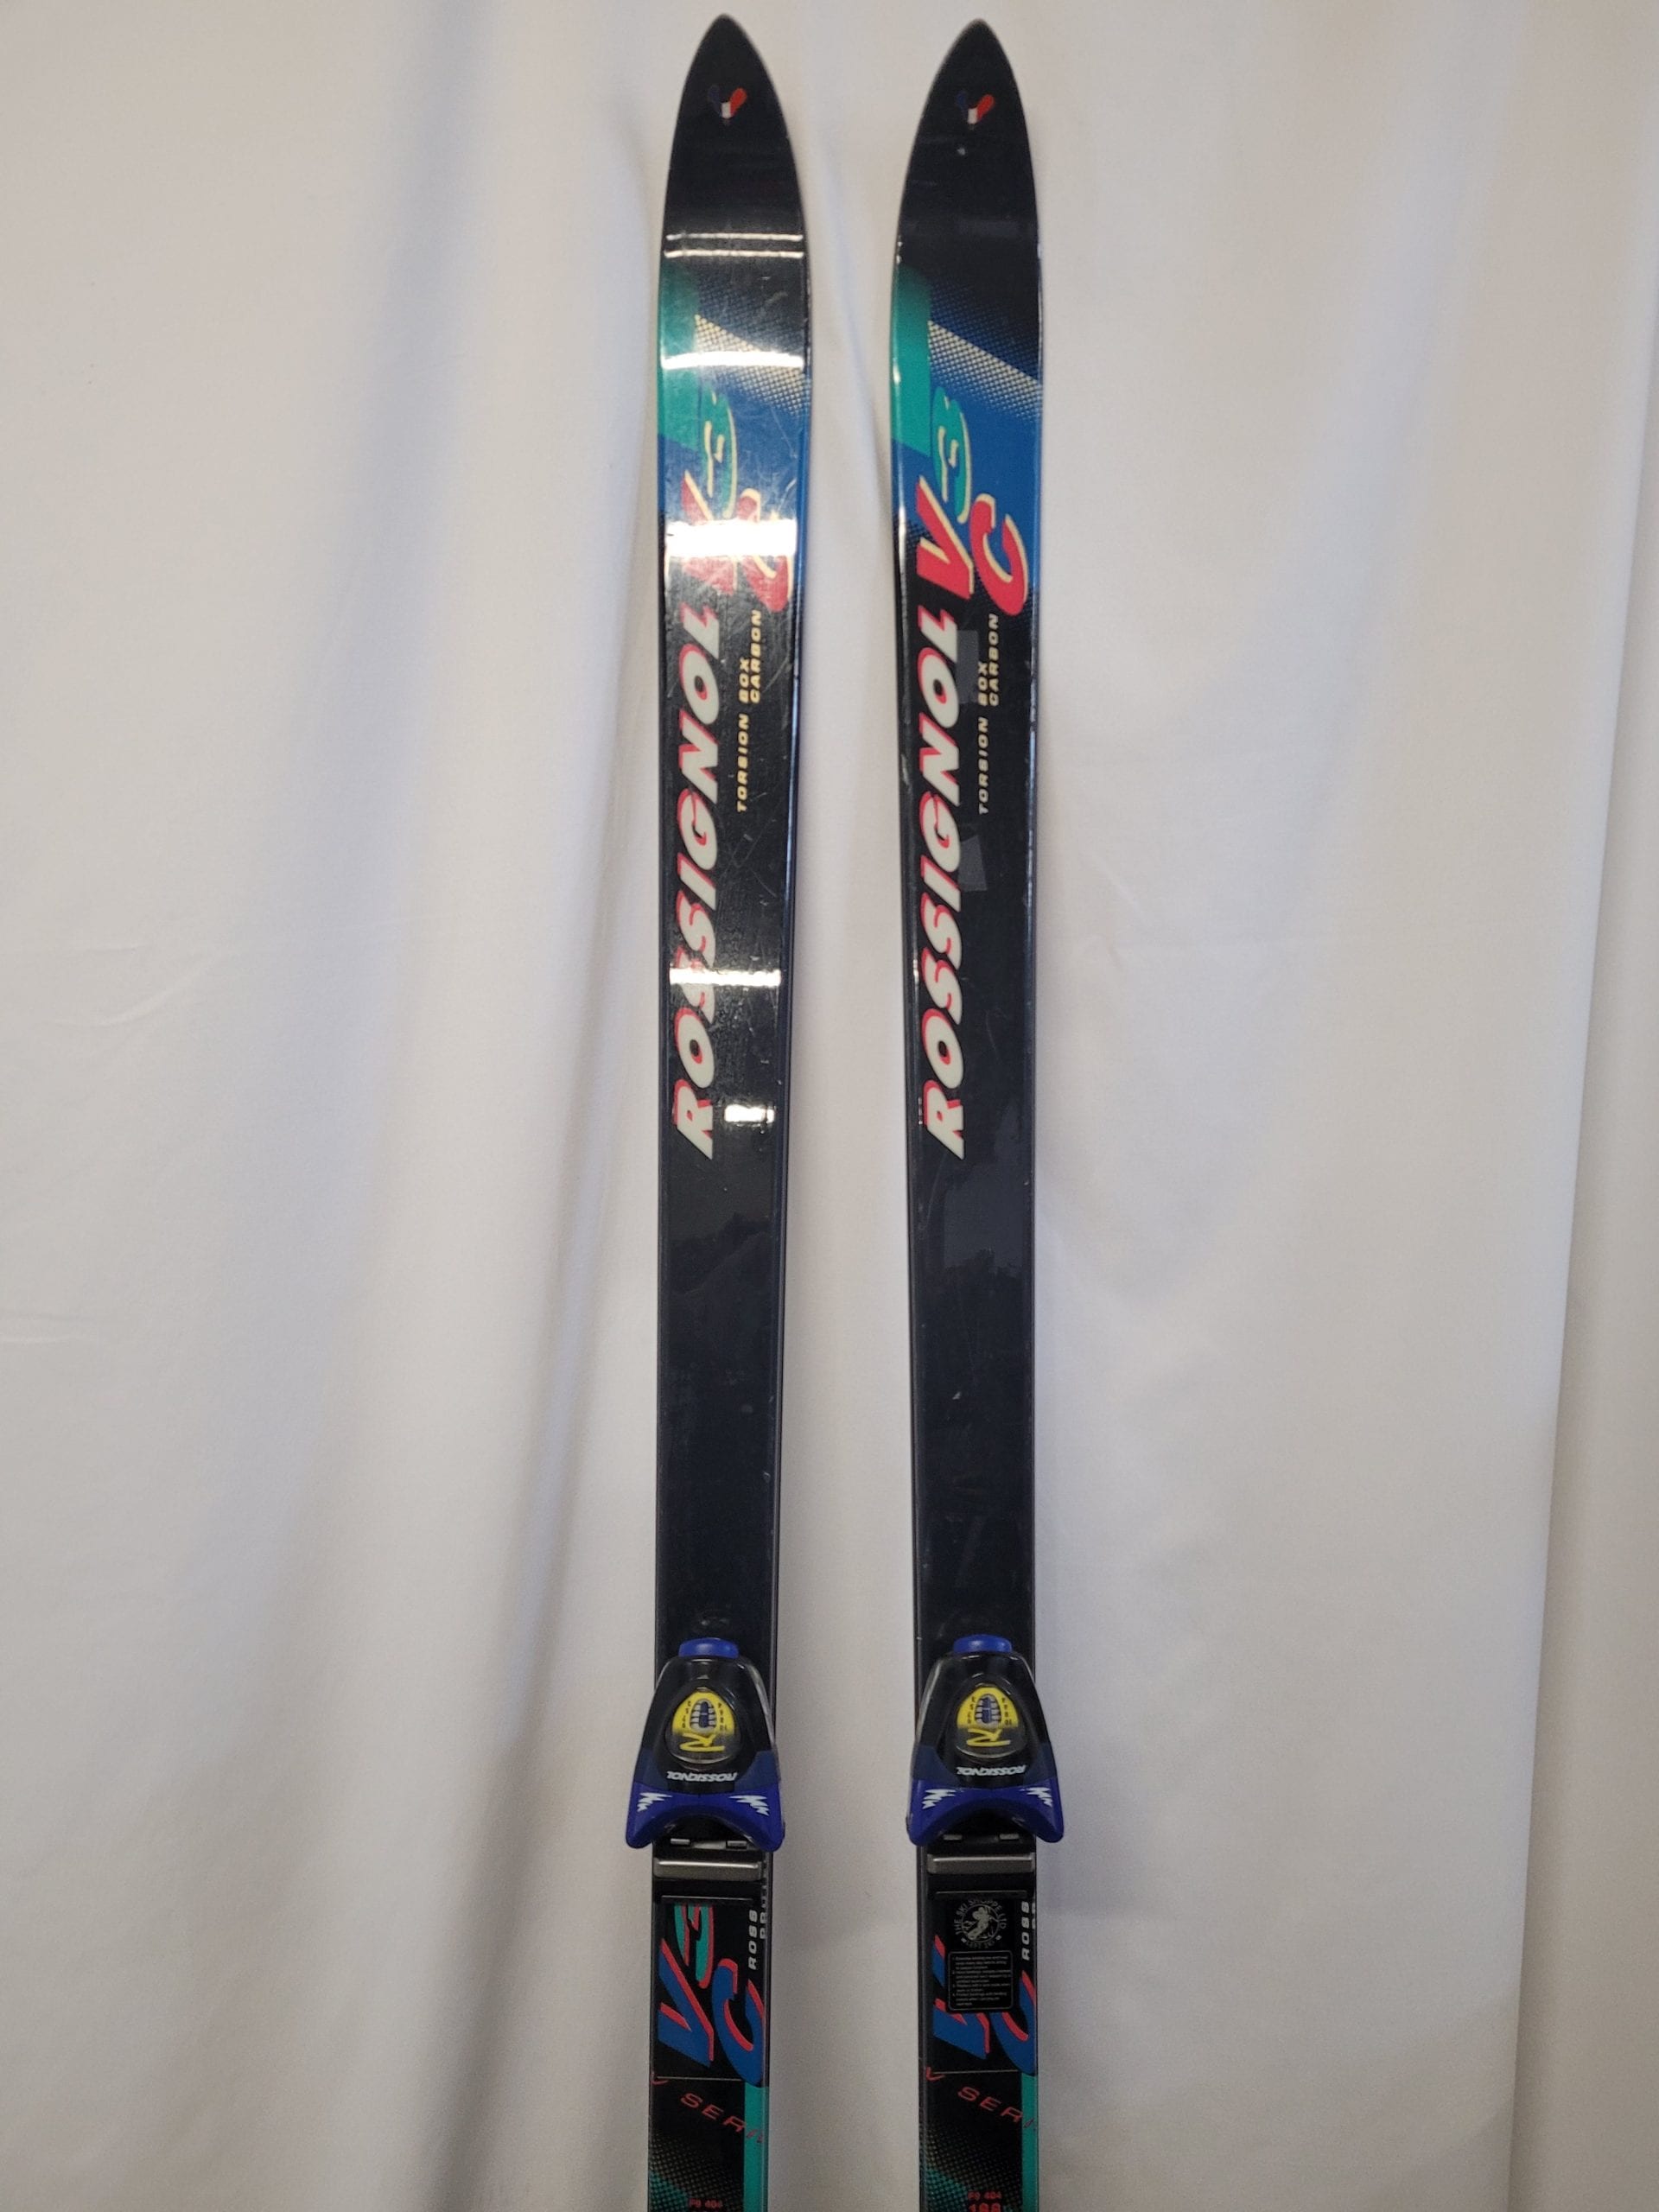 Rossignol VC3 Carbon Skis 188cm with FD7 Binding (1 Broken 